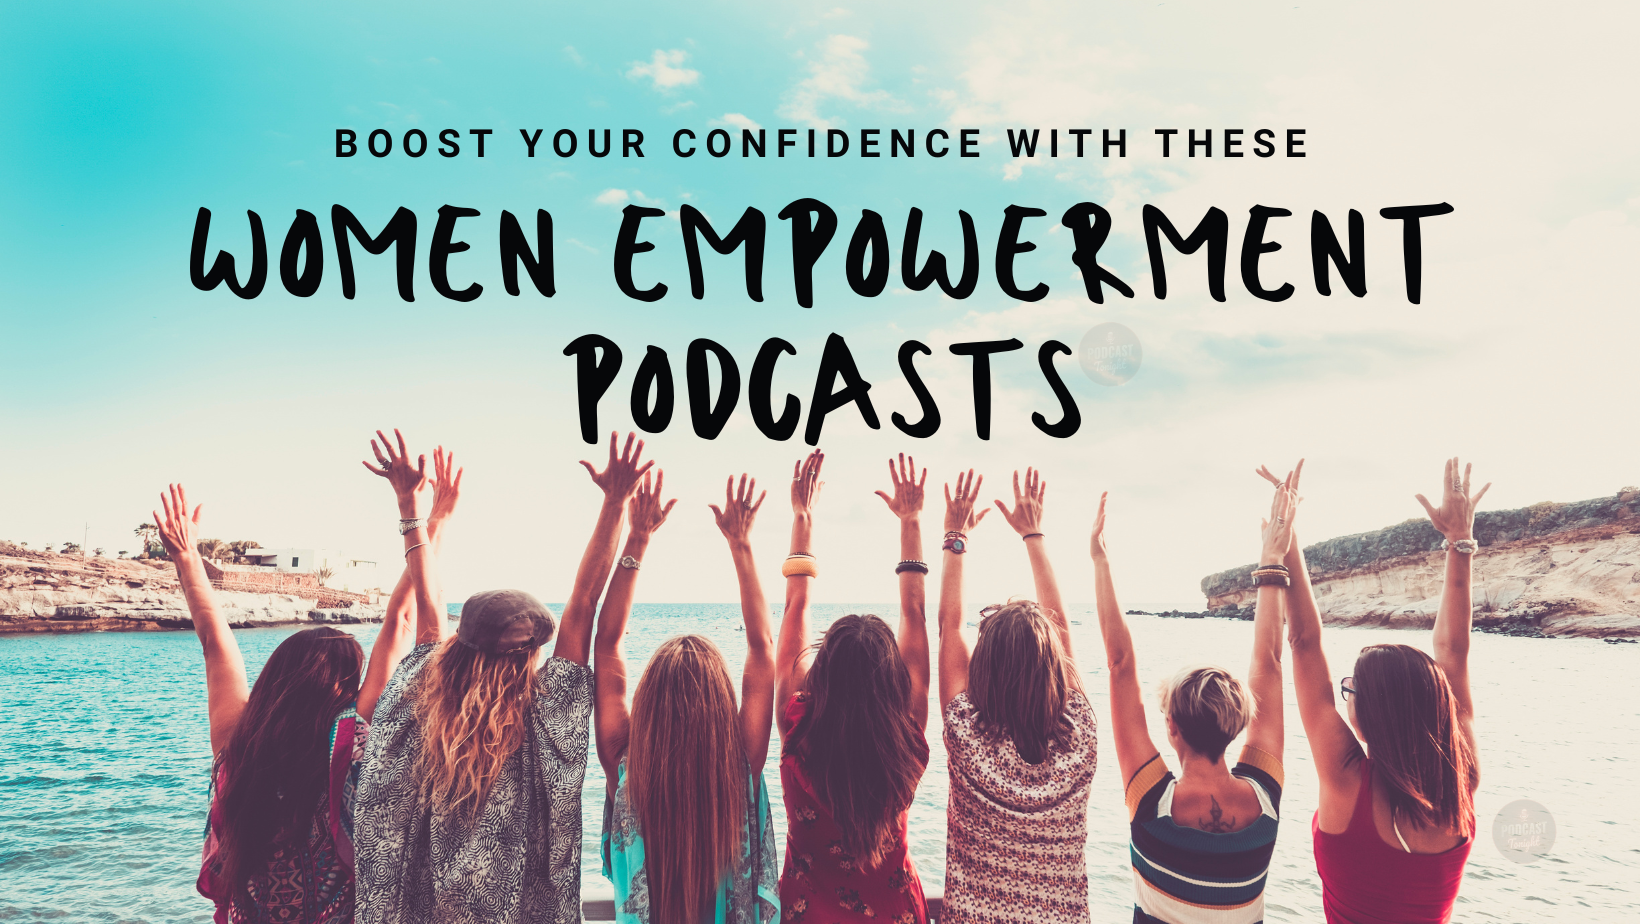 Boost Your Confidence with These Women Empowerment Podcasts